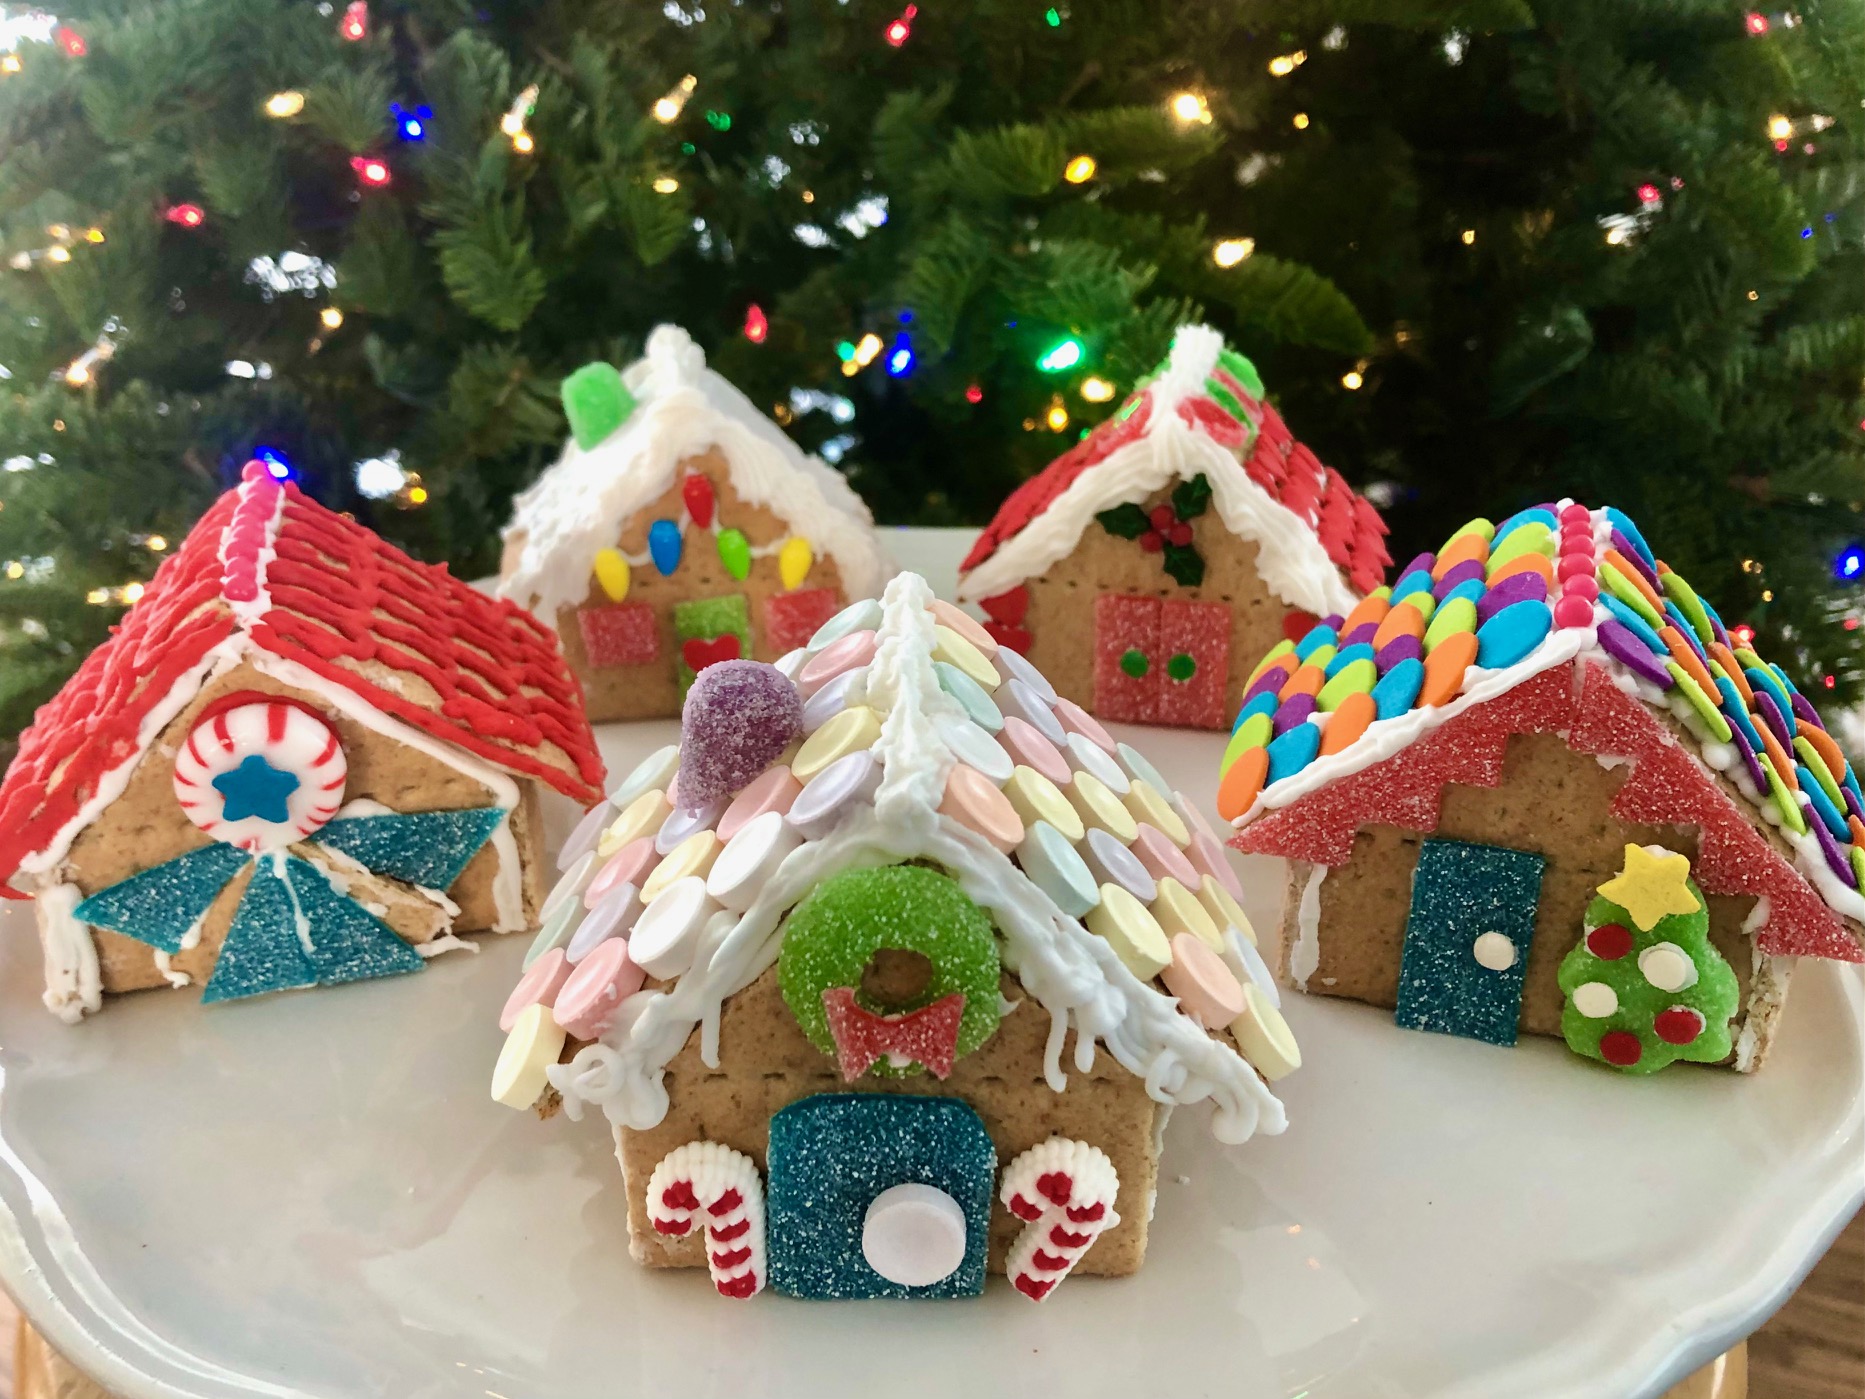 These "gingerbread" houses are really made from graham crackers. They're held together with icing and decorated with candy.